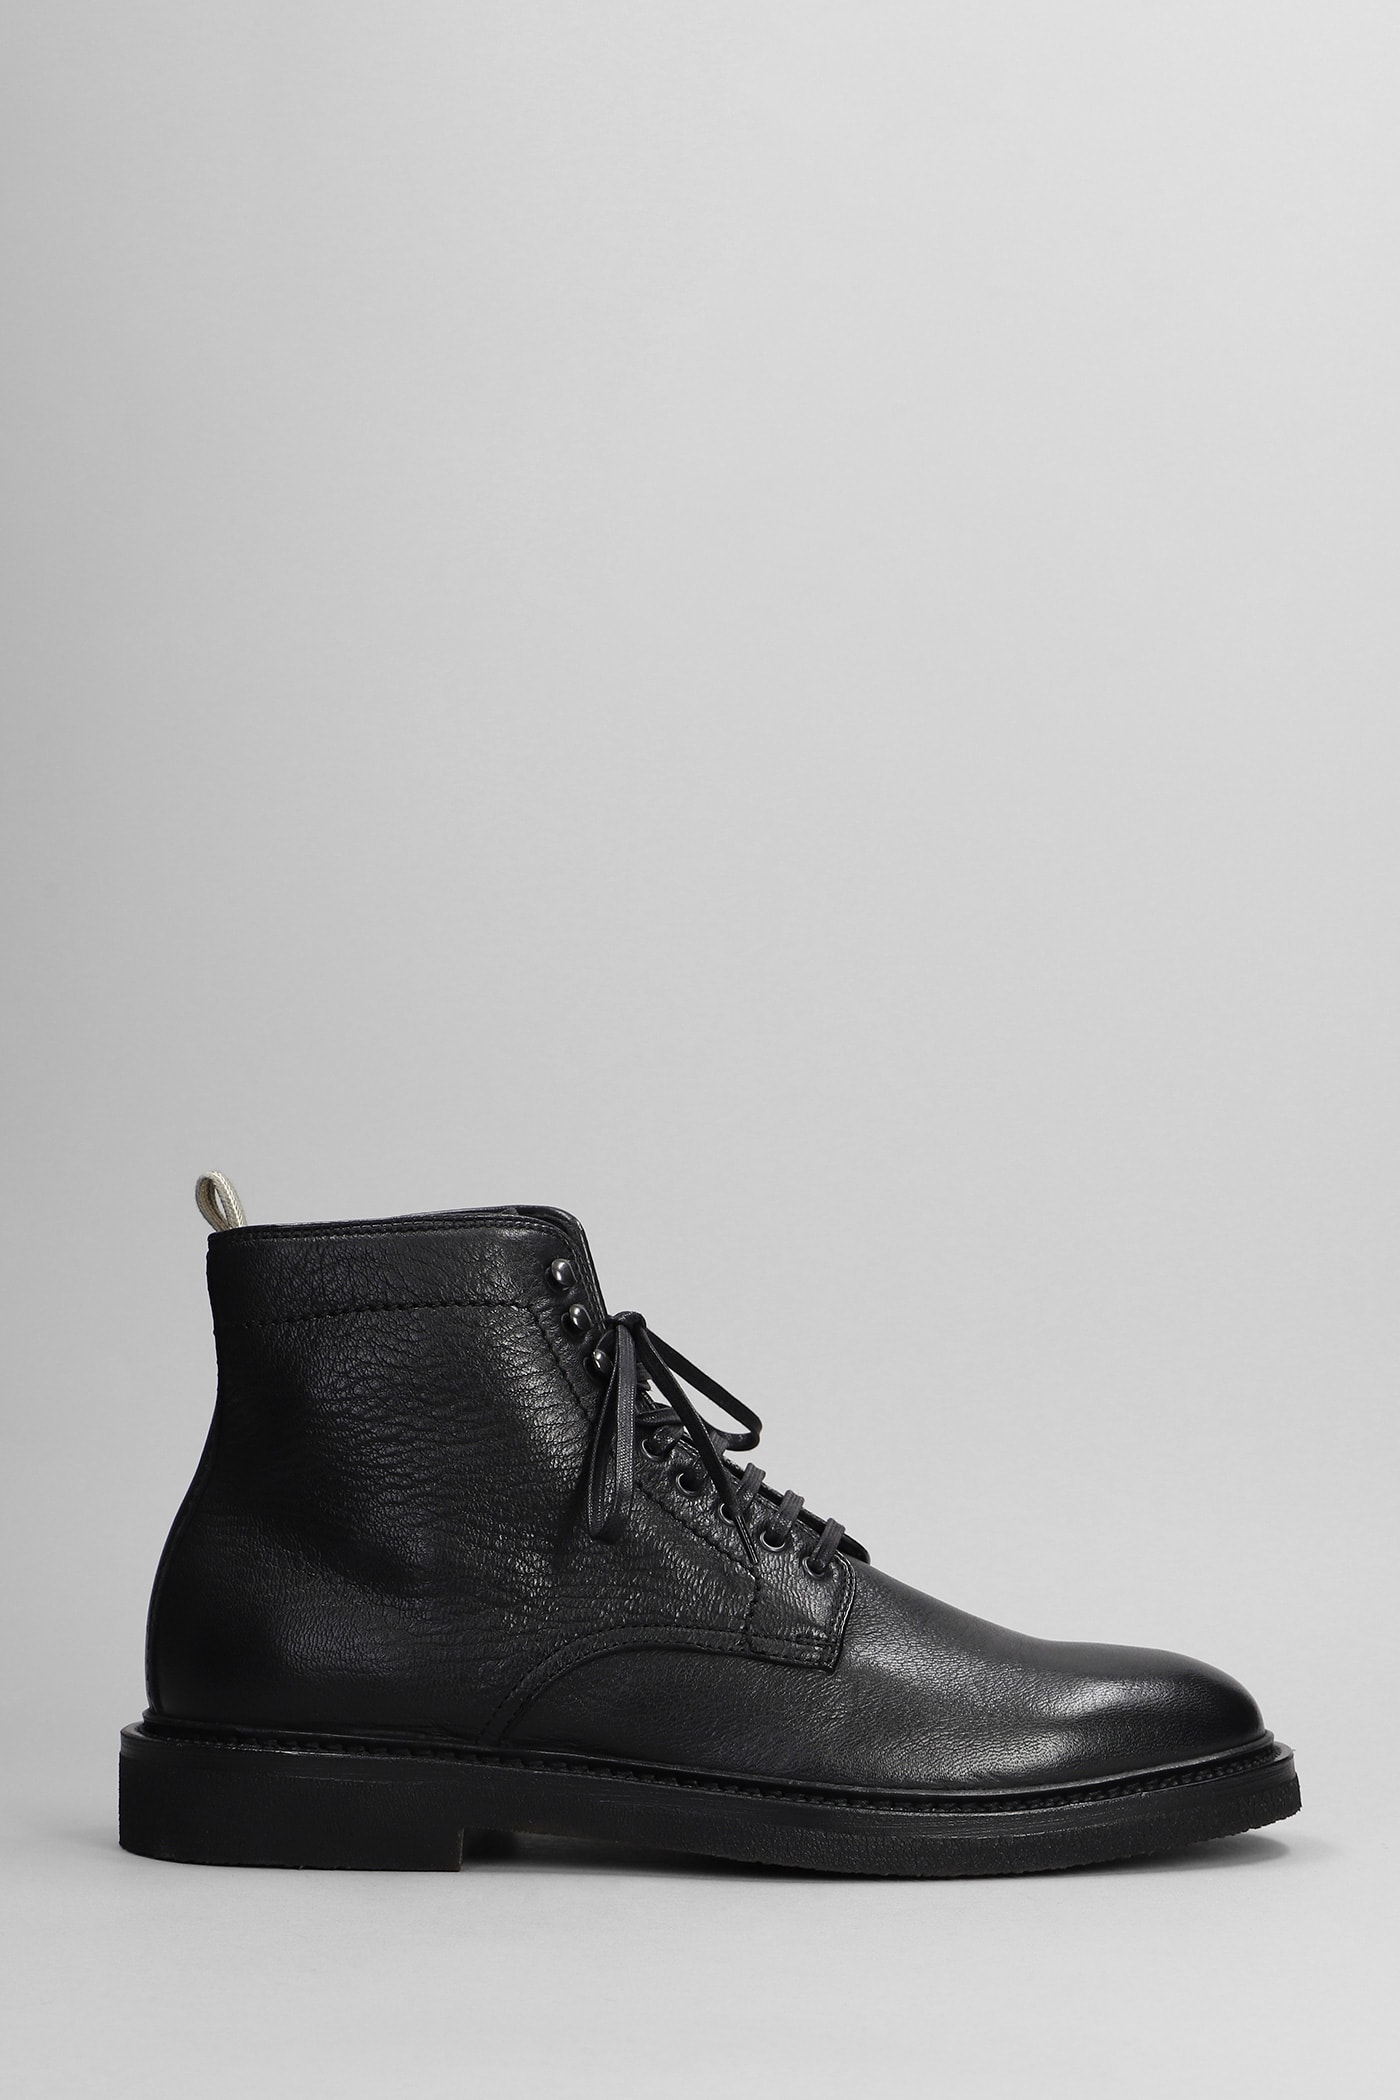 Hopkins Flexi 203 Ankle Boots In Black Leather